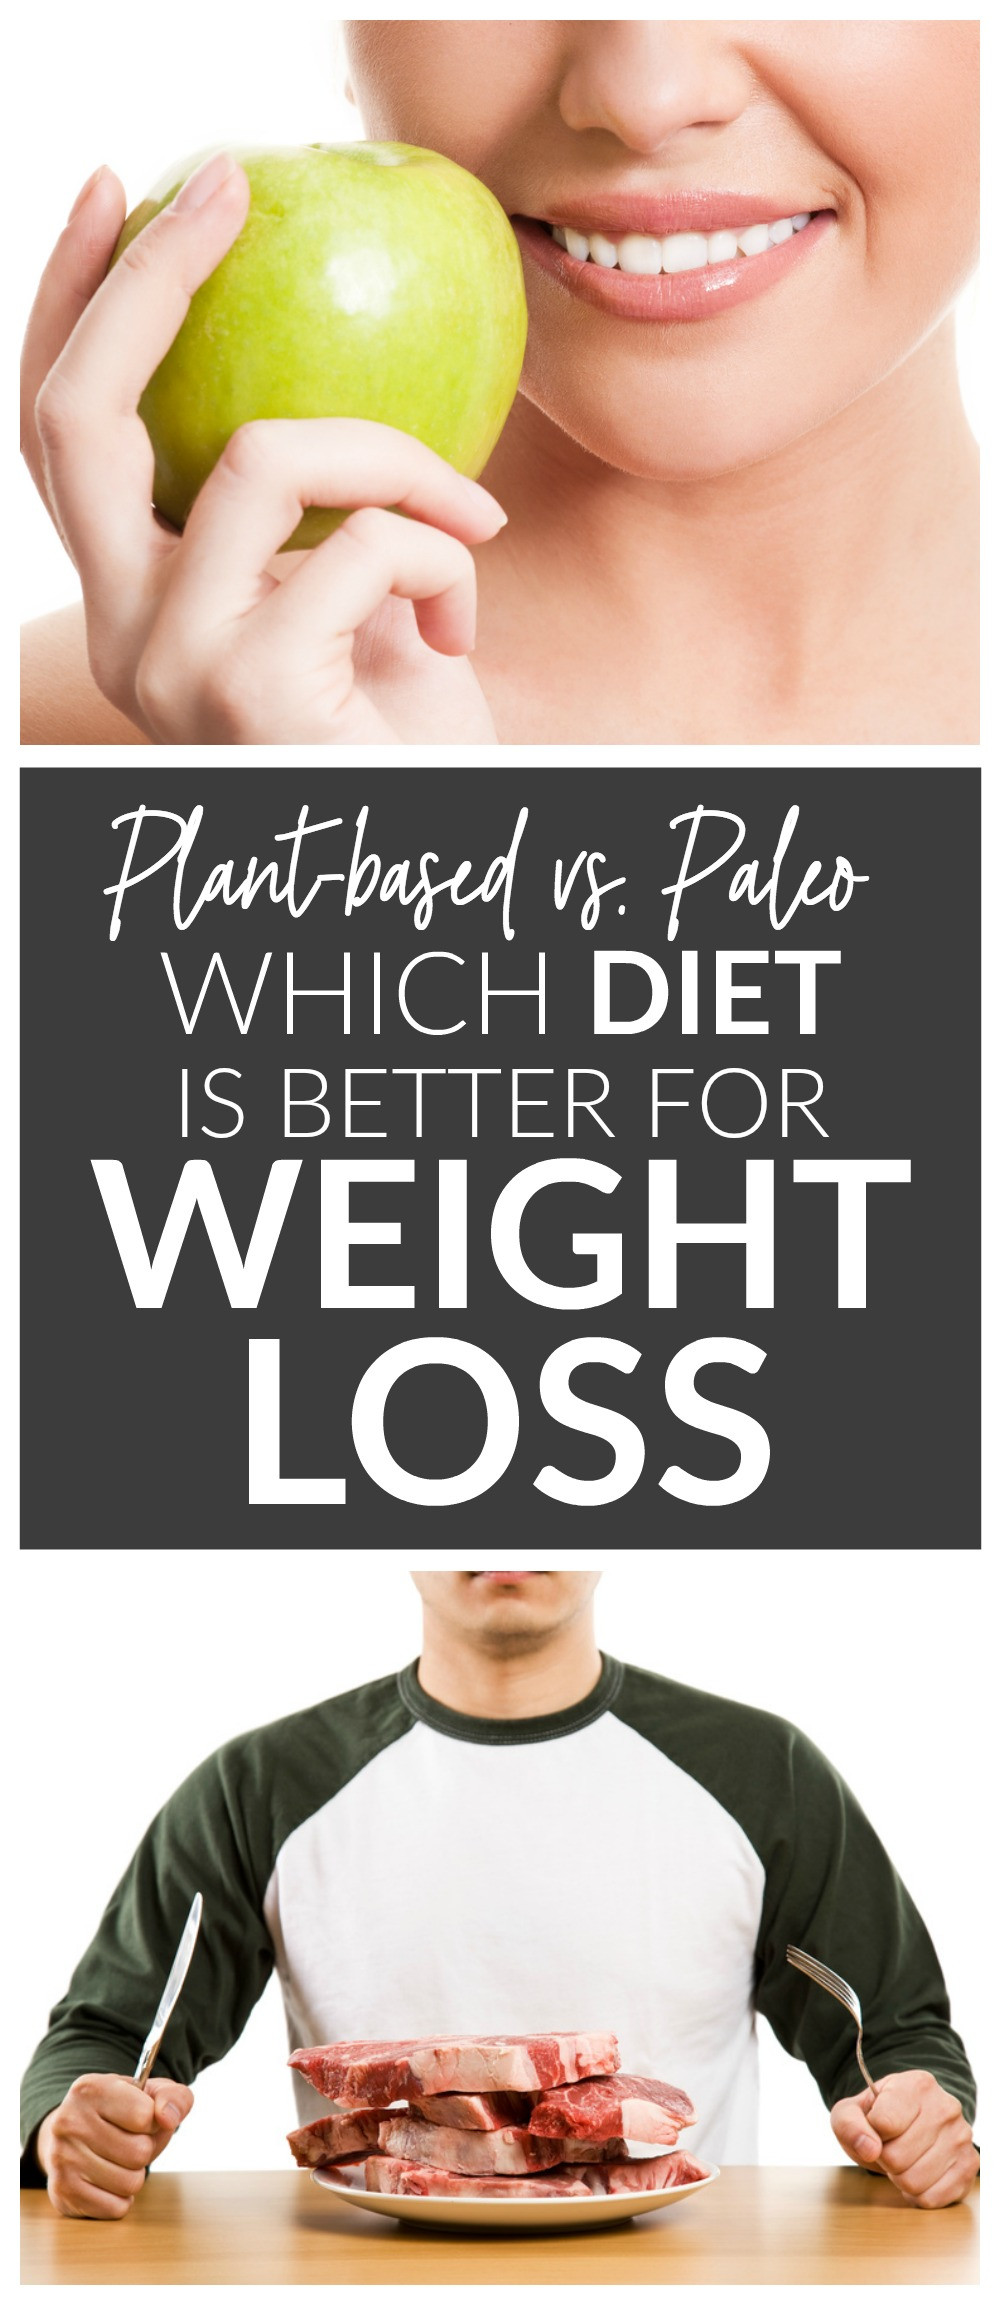 Plant Based Diet For Weight Loss Health
 Do Plant Based Diets Help With Weight Loss